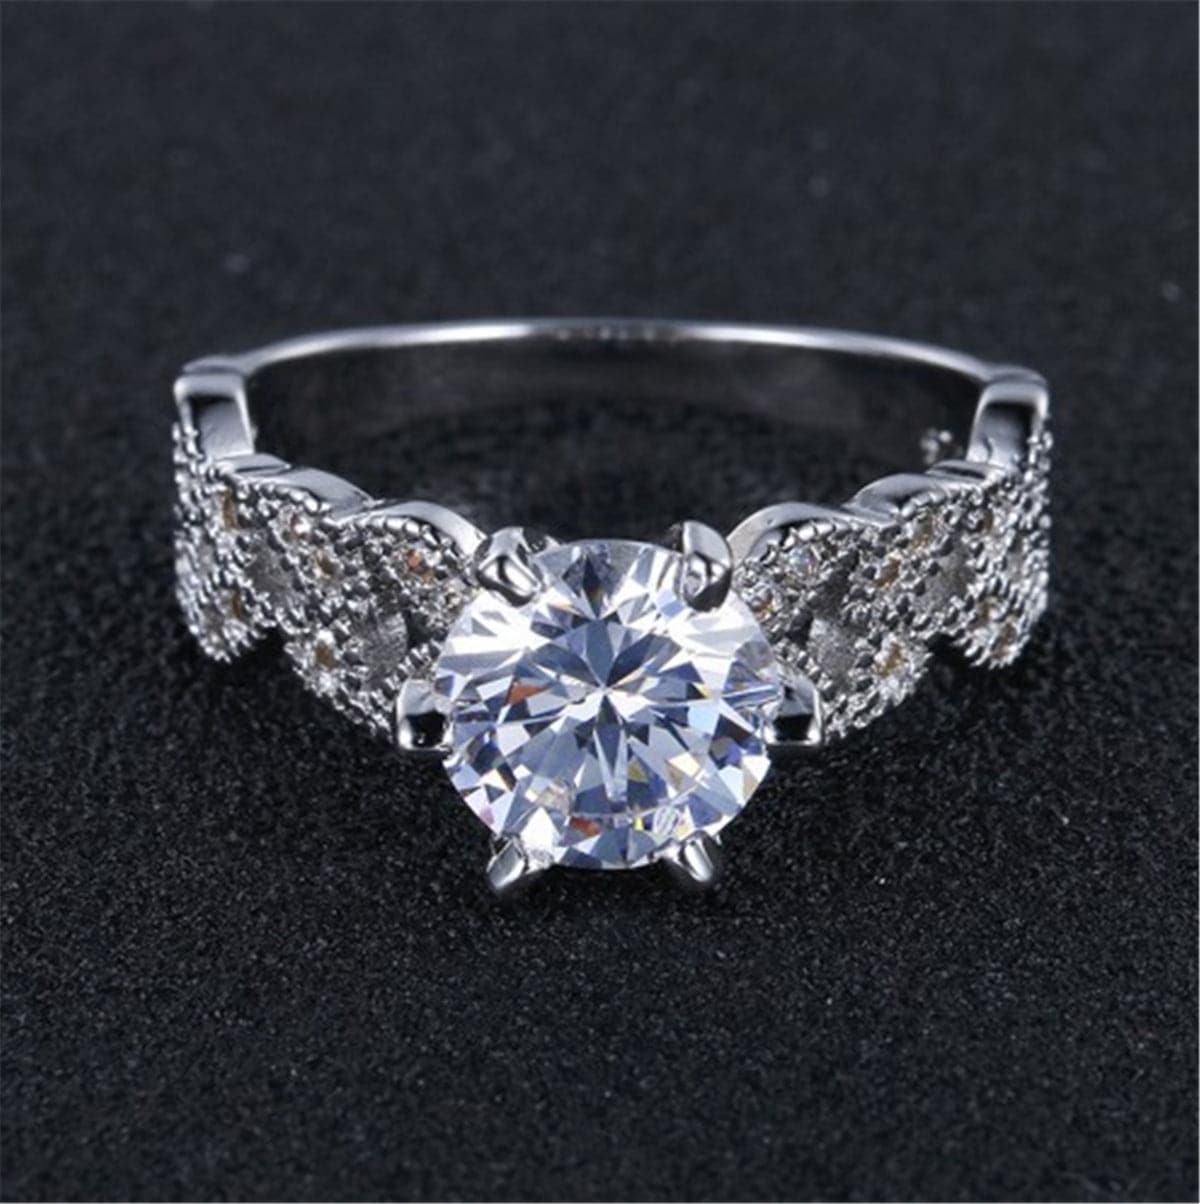 Crystal & Silver-Plated Leaf Band Ring